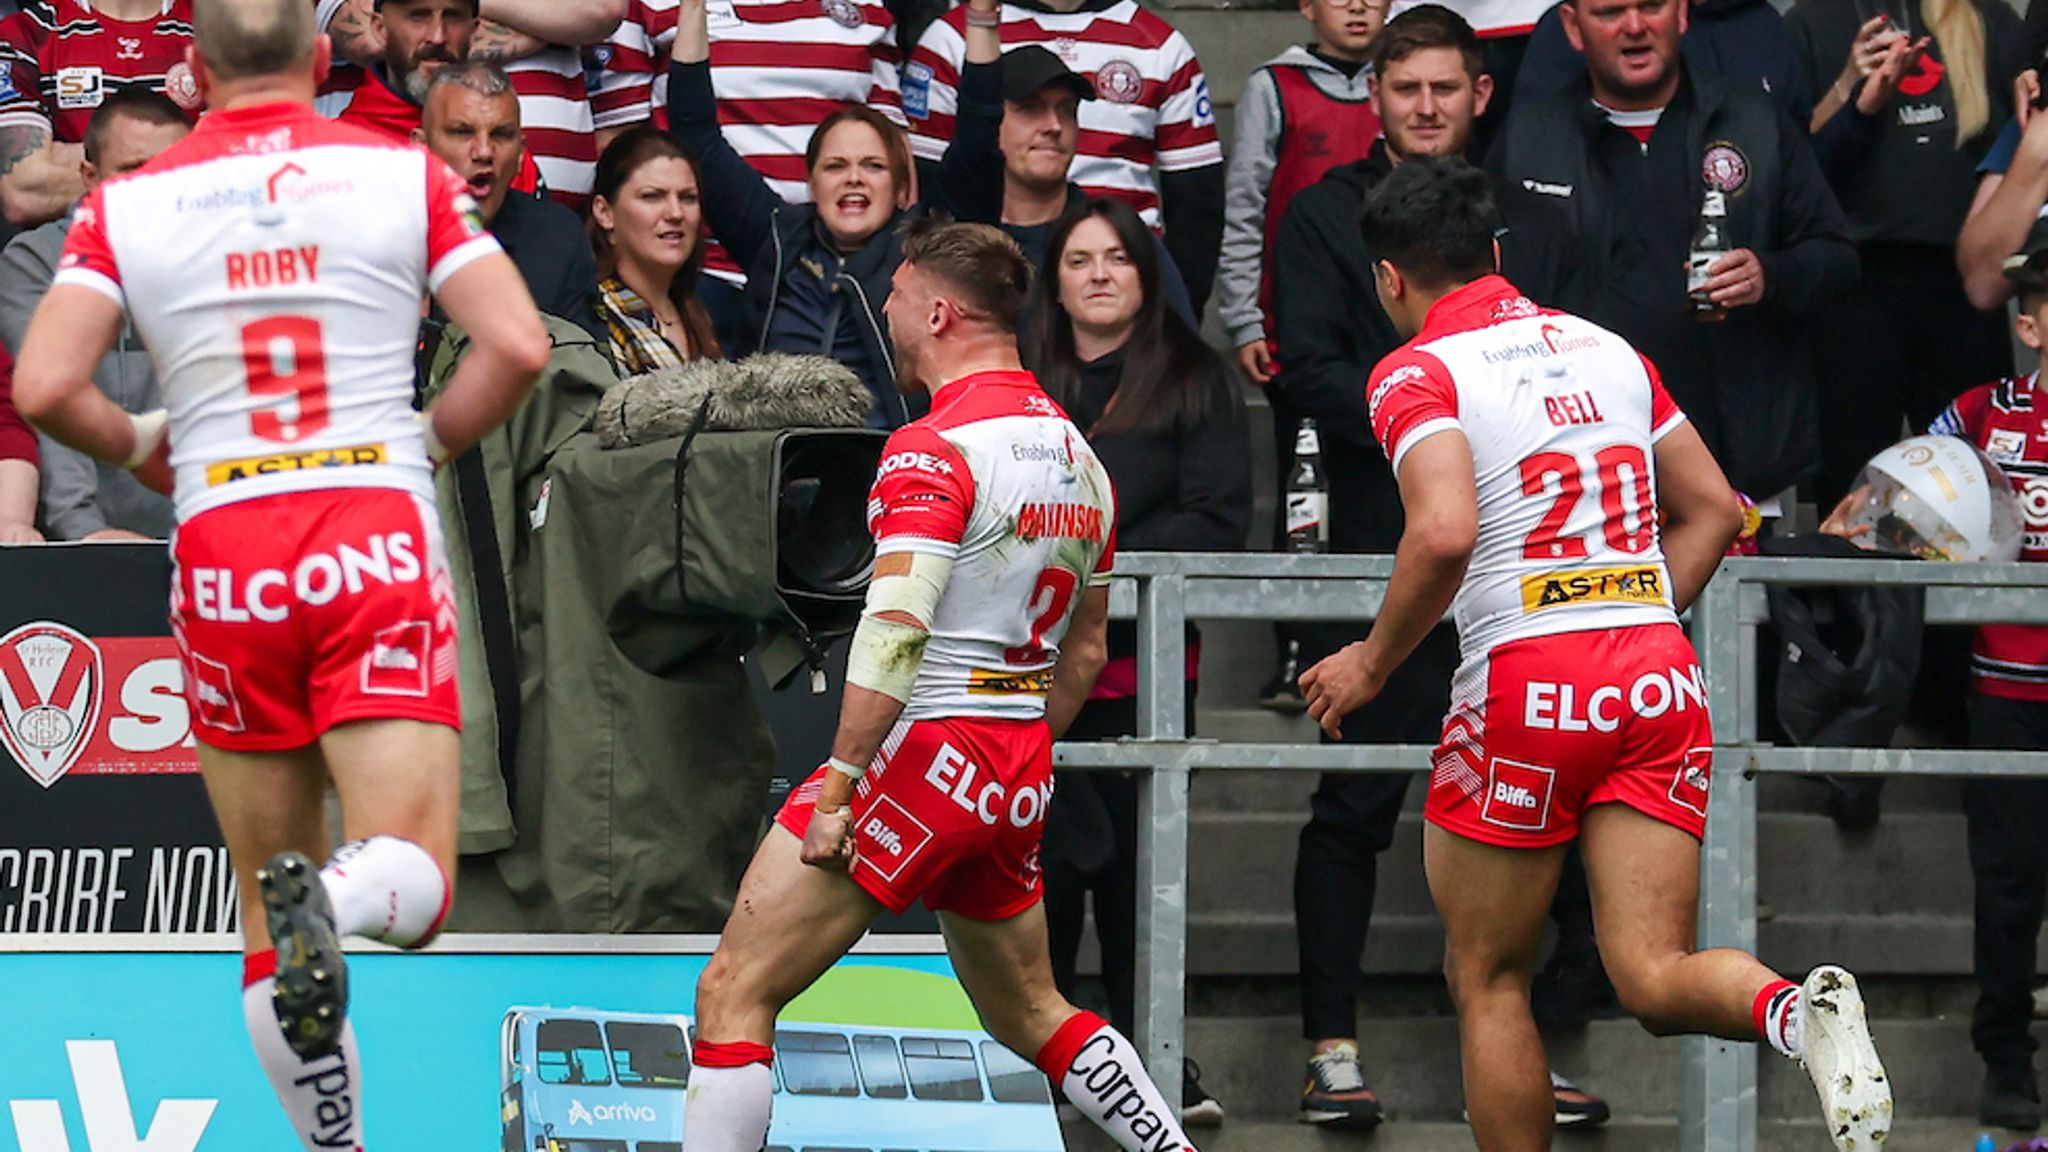 St Helens 22-4 Wigan Saints silence Warriors in dramatic derby clash Rugby League News Sky Sports